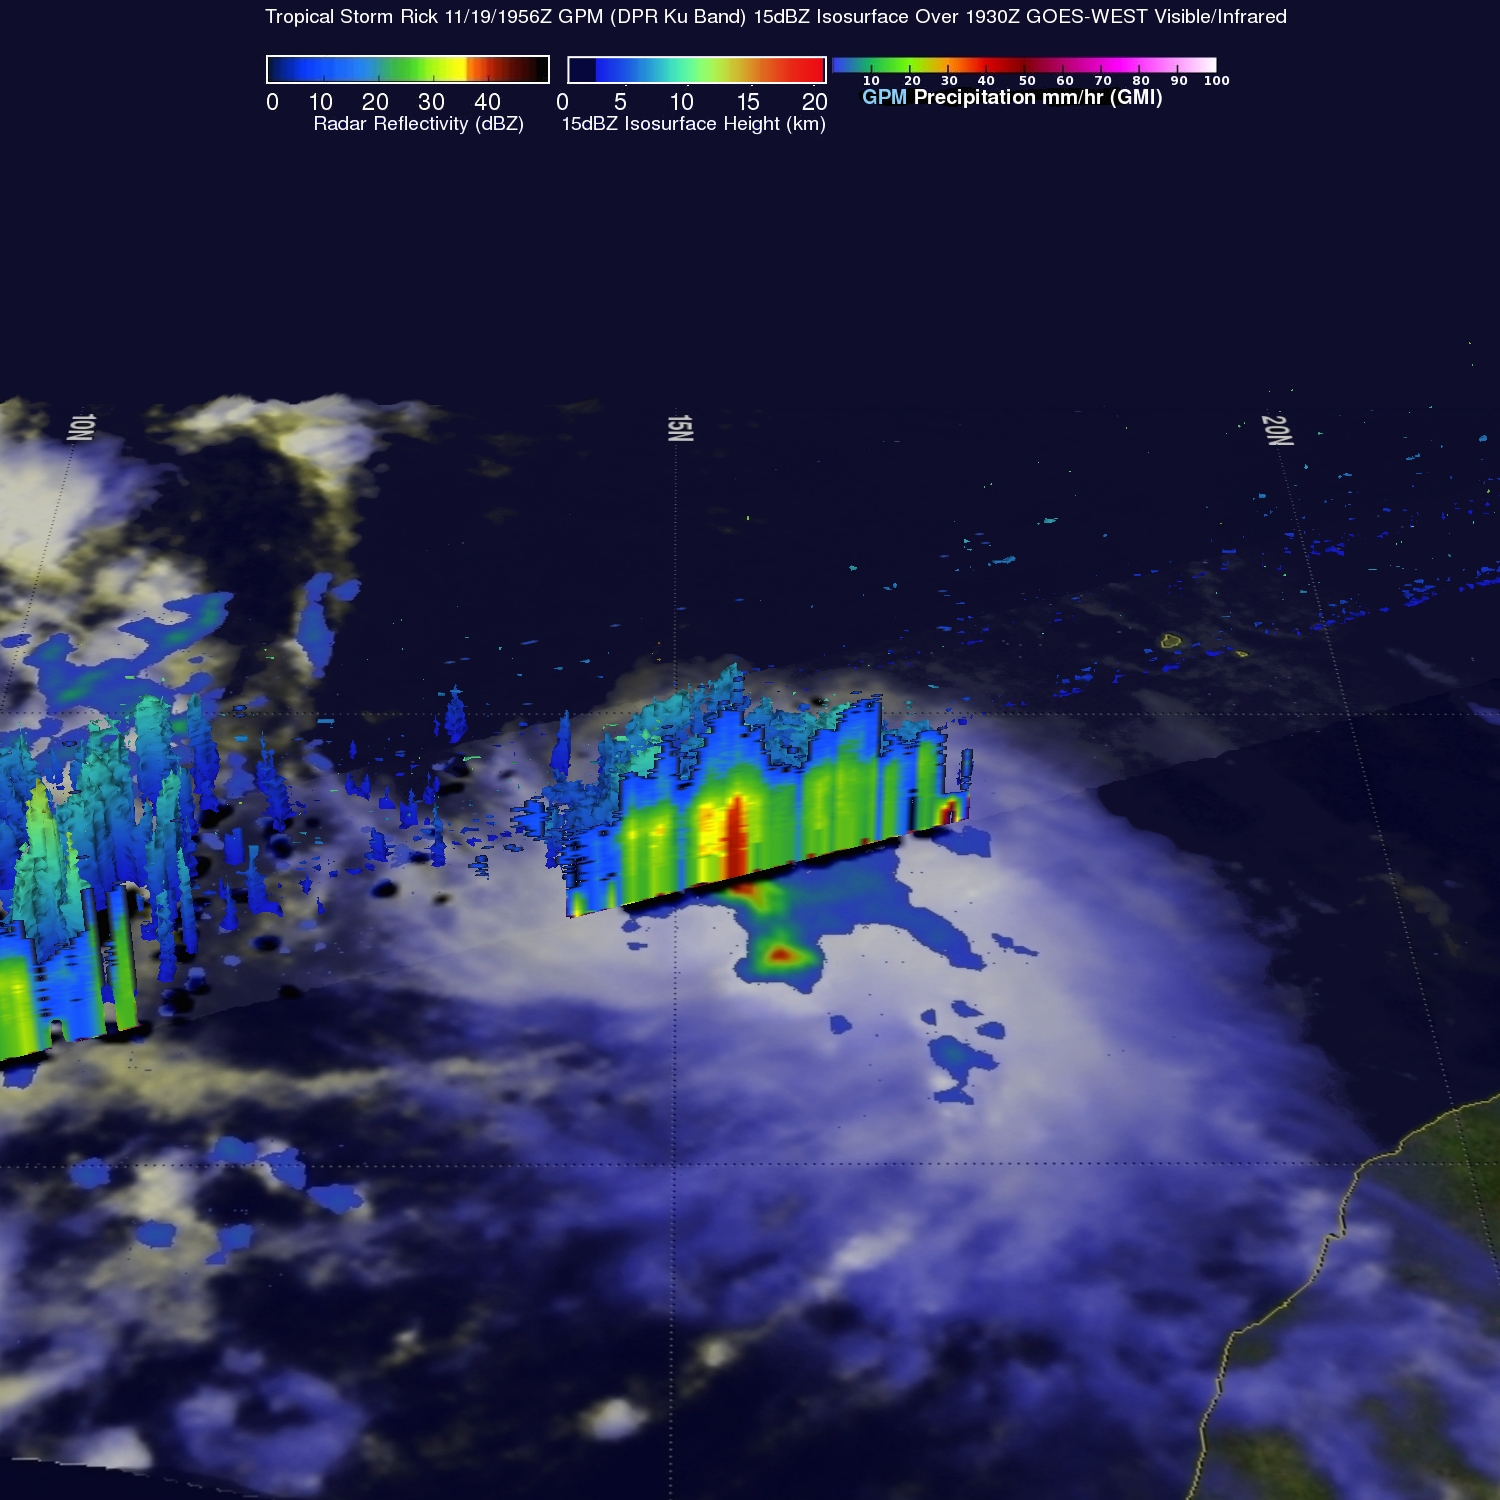 Tropical Storm Rick Examined By GPM